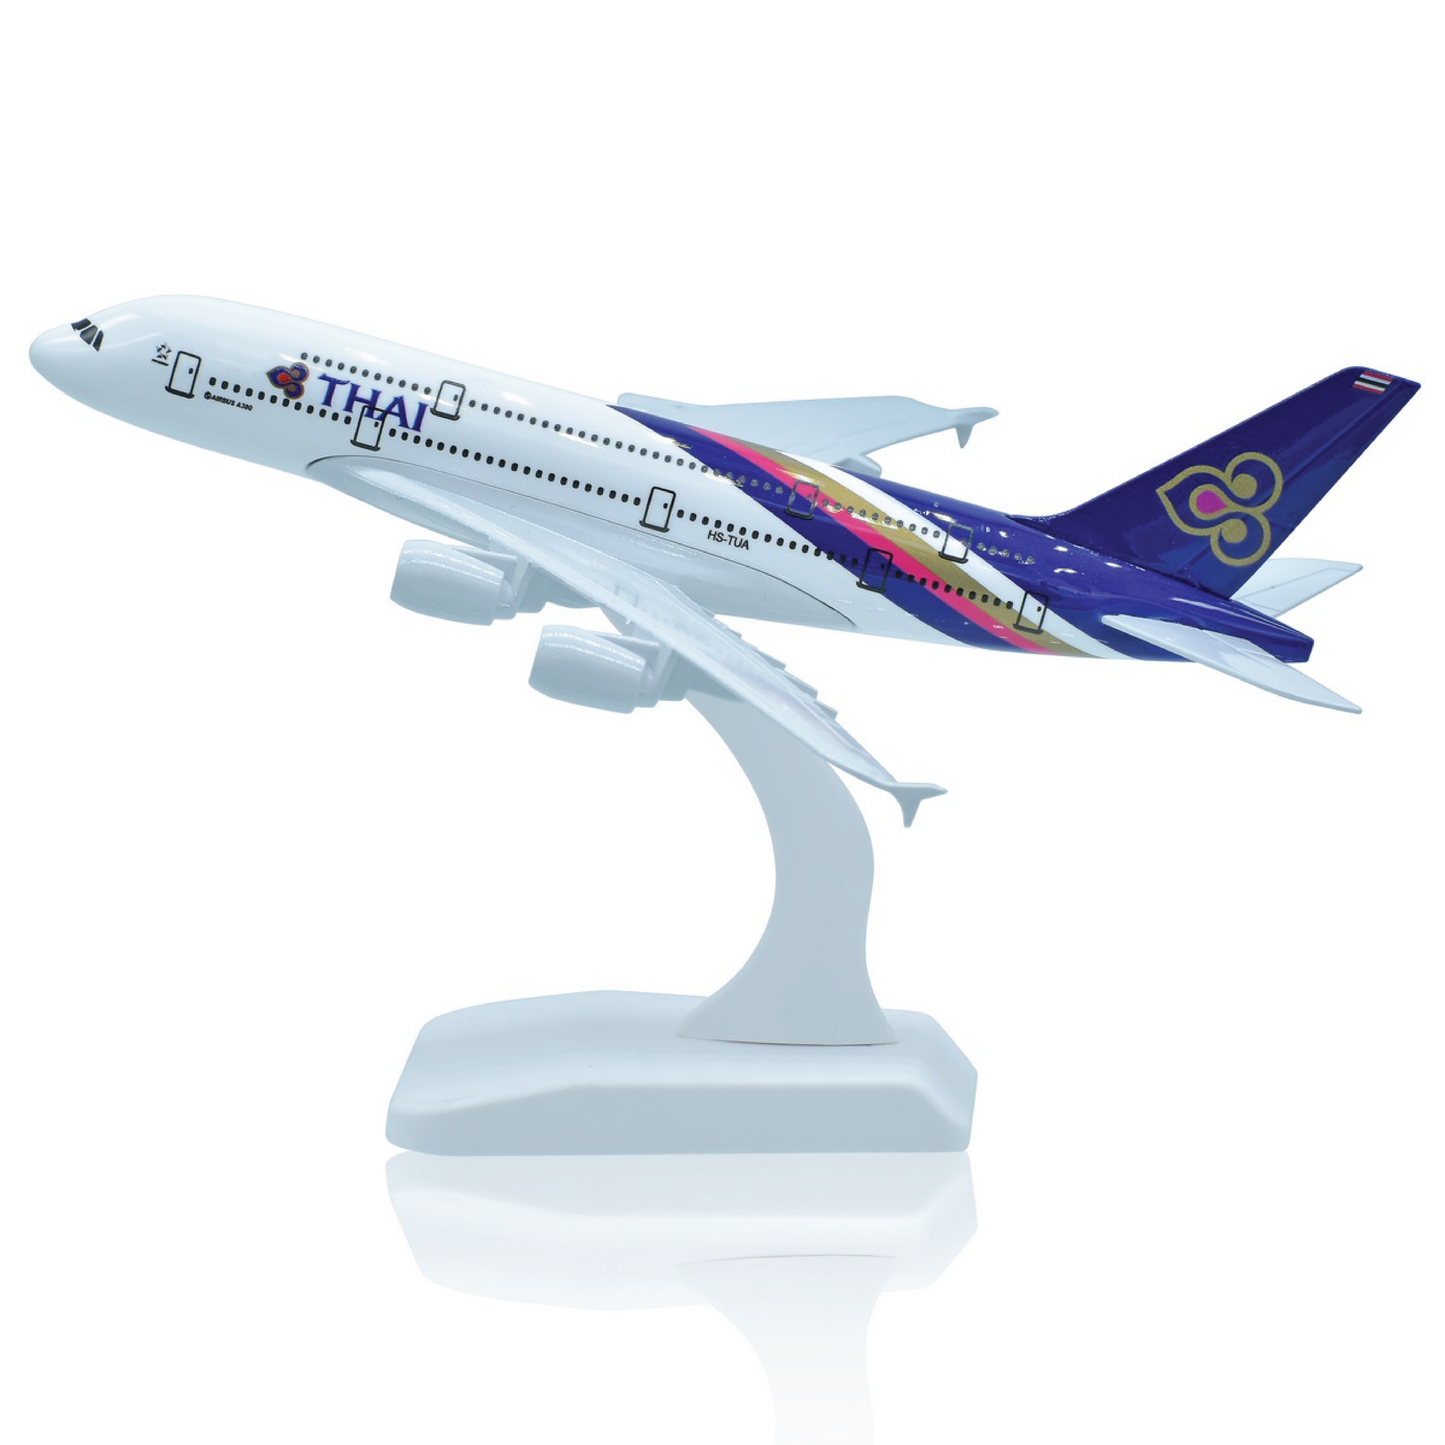 Aircraft Model Big Thai Airways - For Office Use, Personal Use, or Corporate Gifting JA